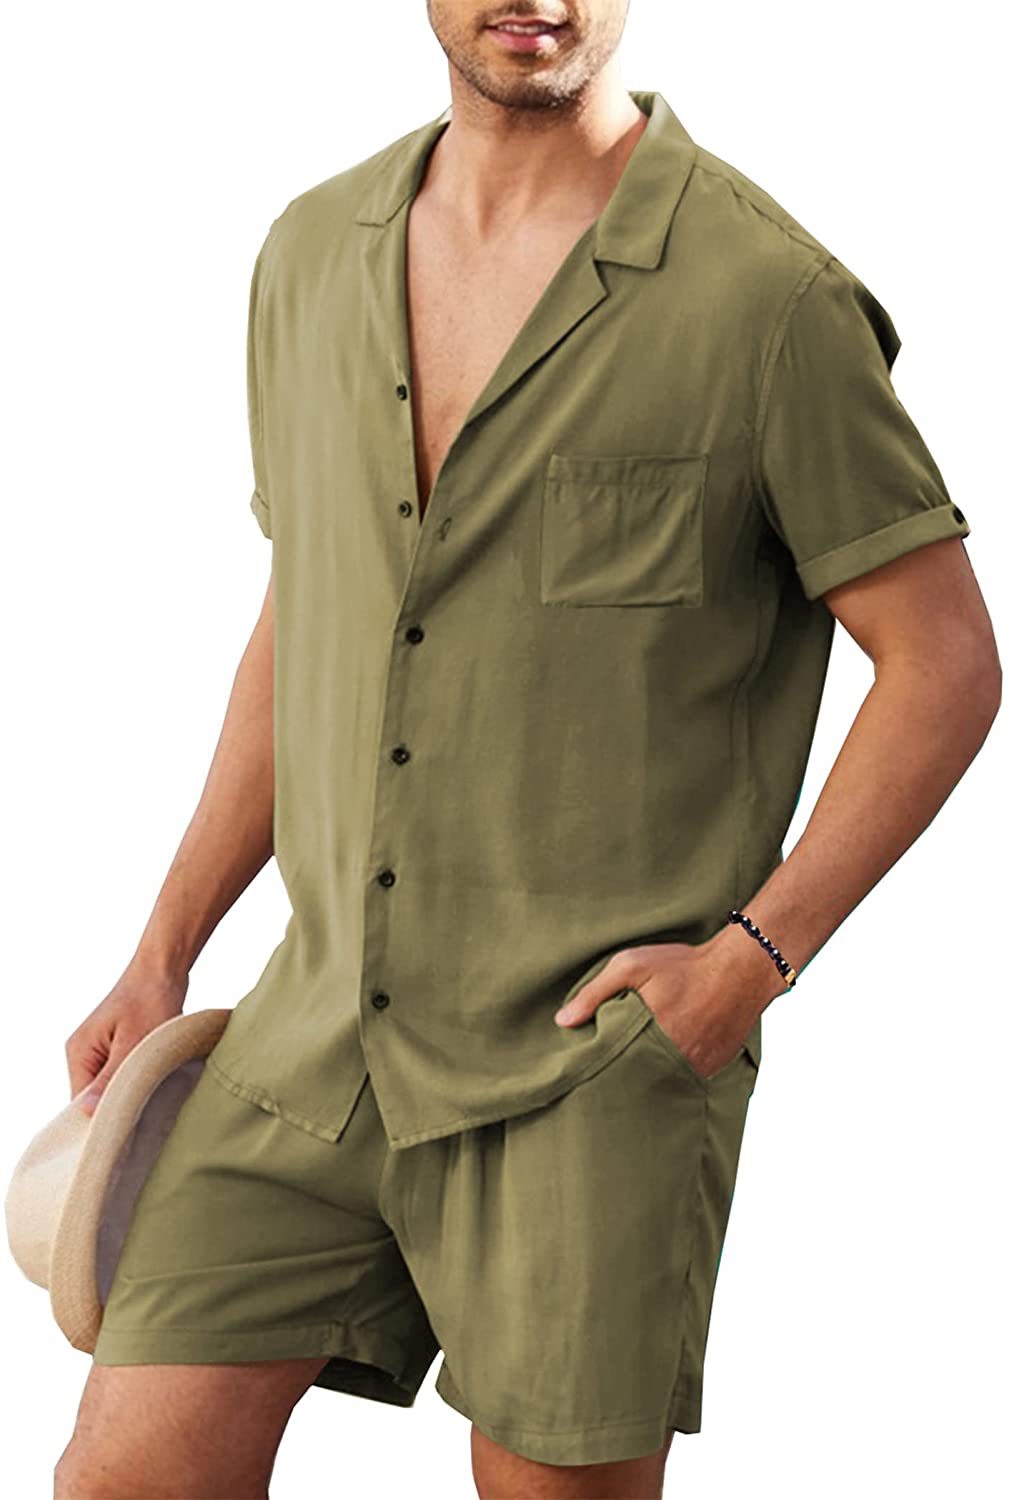 Casual Summer Men's Short Sleeves T Shirts and Shorts-Suits-Army Green-M-Free Shipping at meselling99